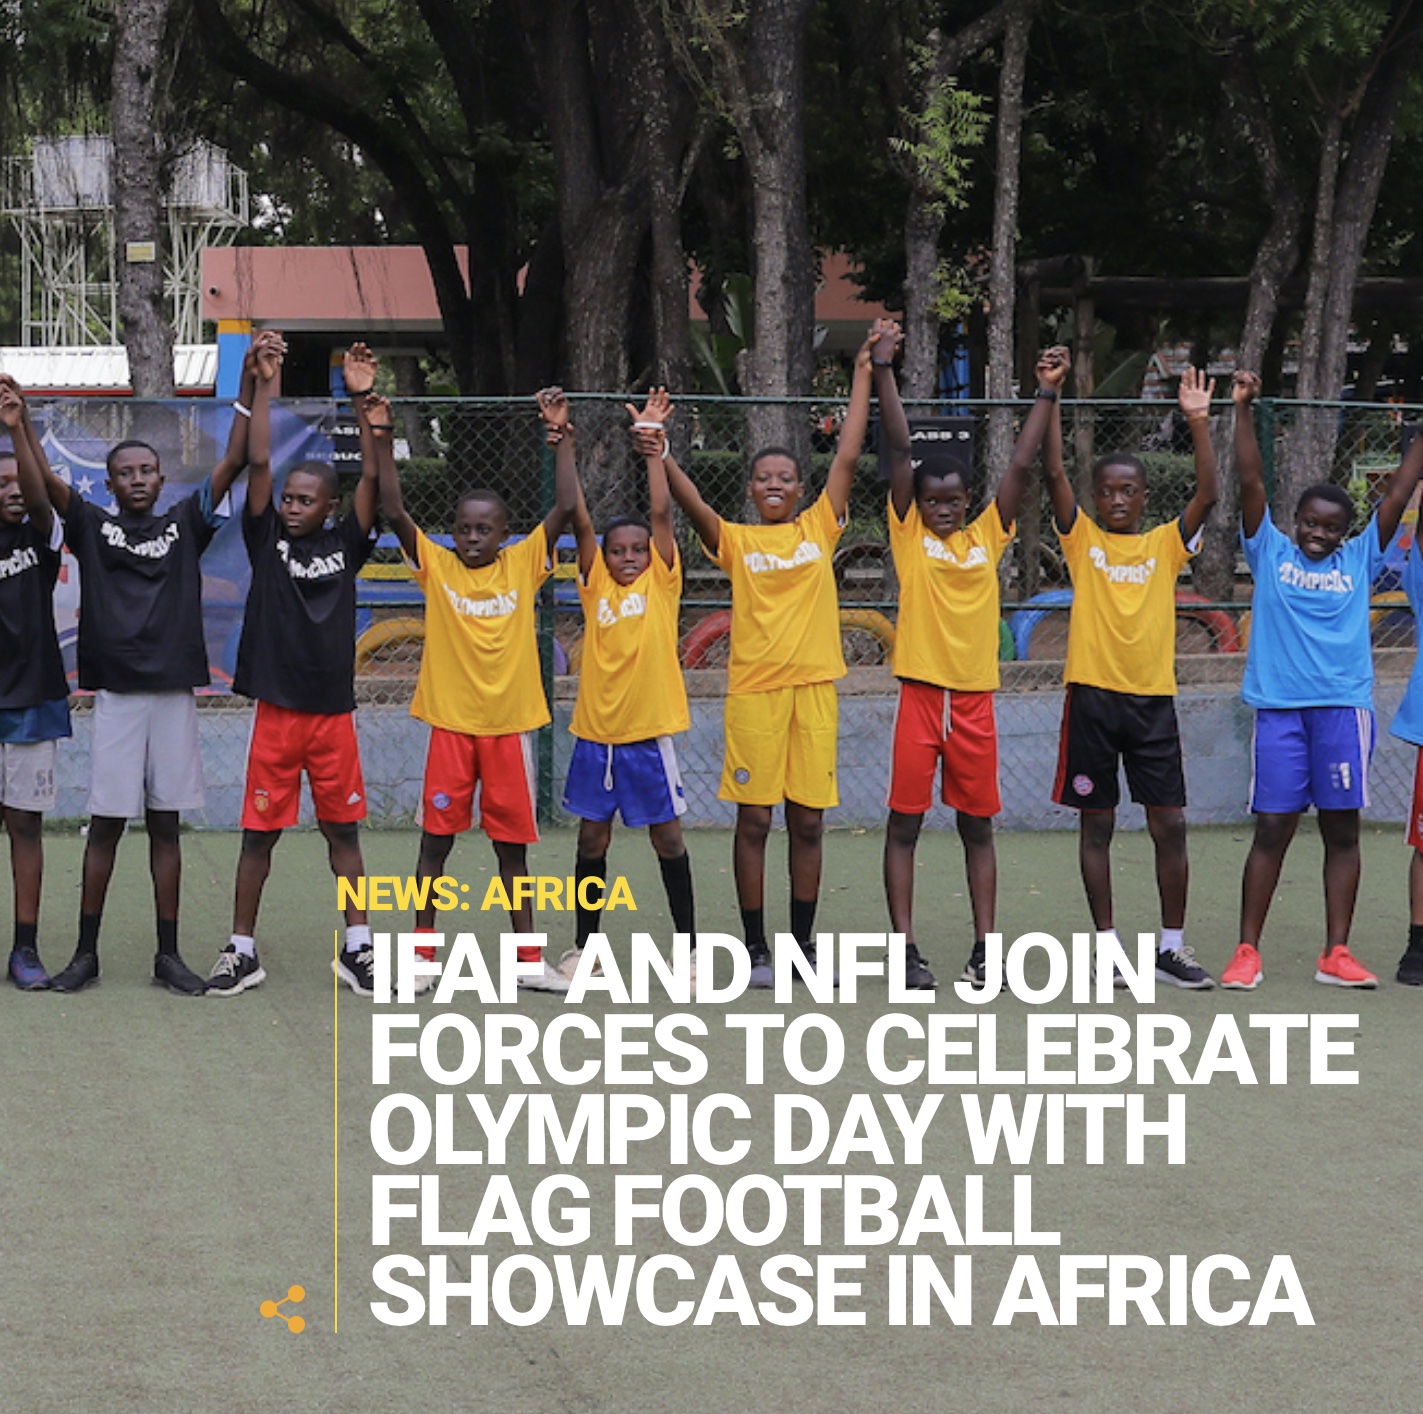 NFL and IFAF join forces to celebrate Olympic Day